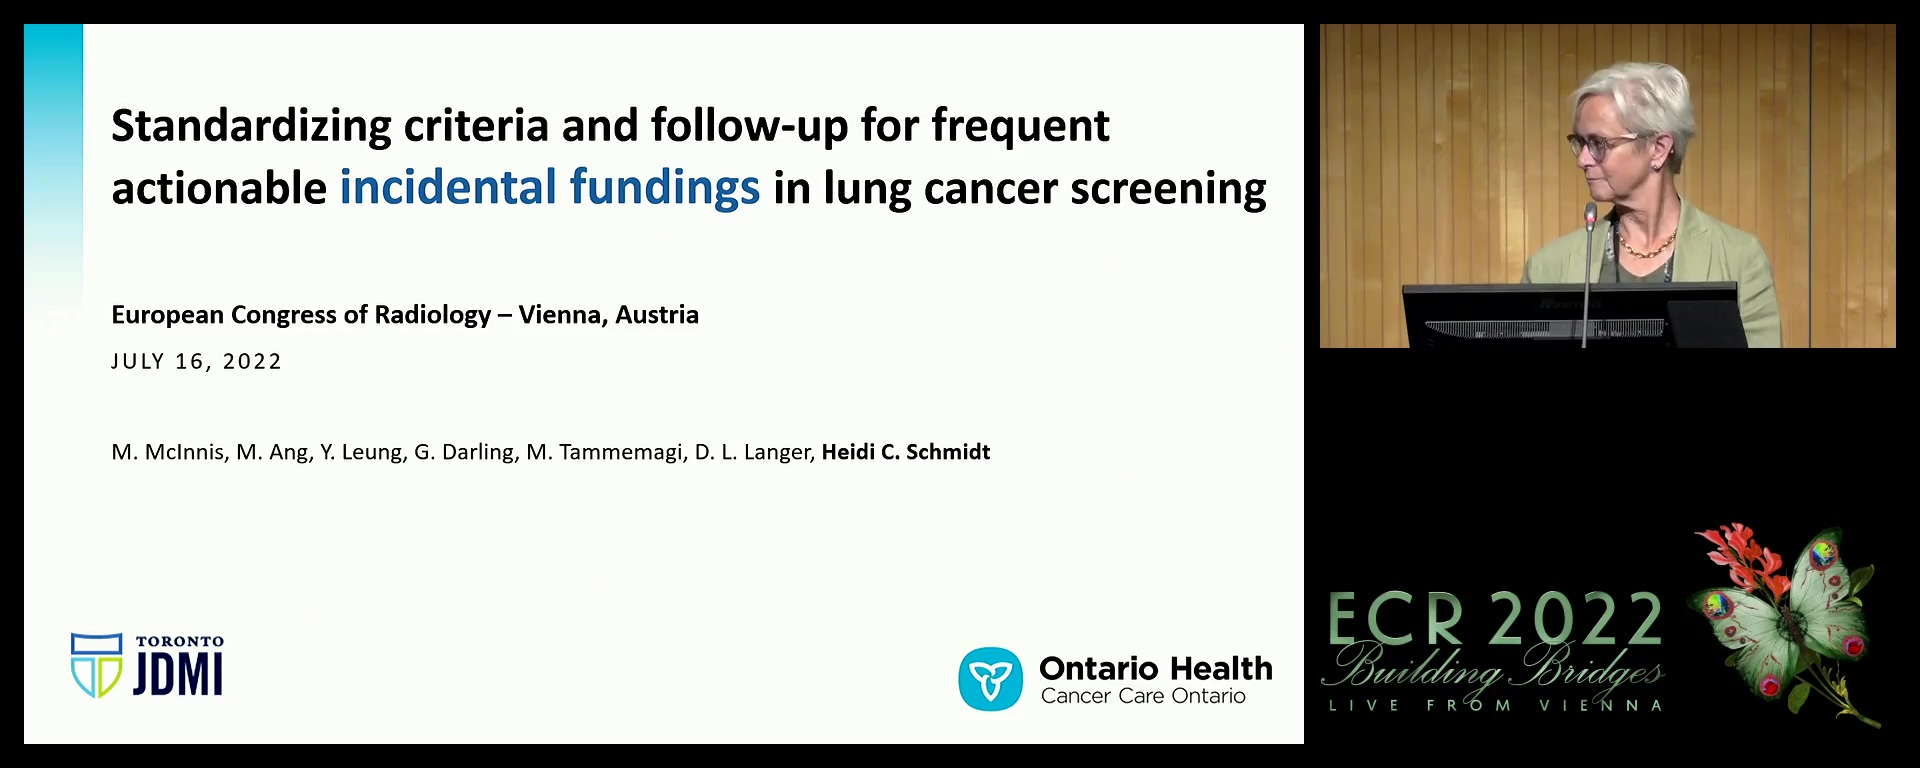 Standardising criteria and follow-up for frequent actionable incidental fundings in lung cancer screening - Heidi C. Schmidt, Toronto / CA